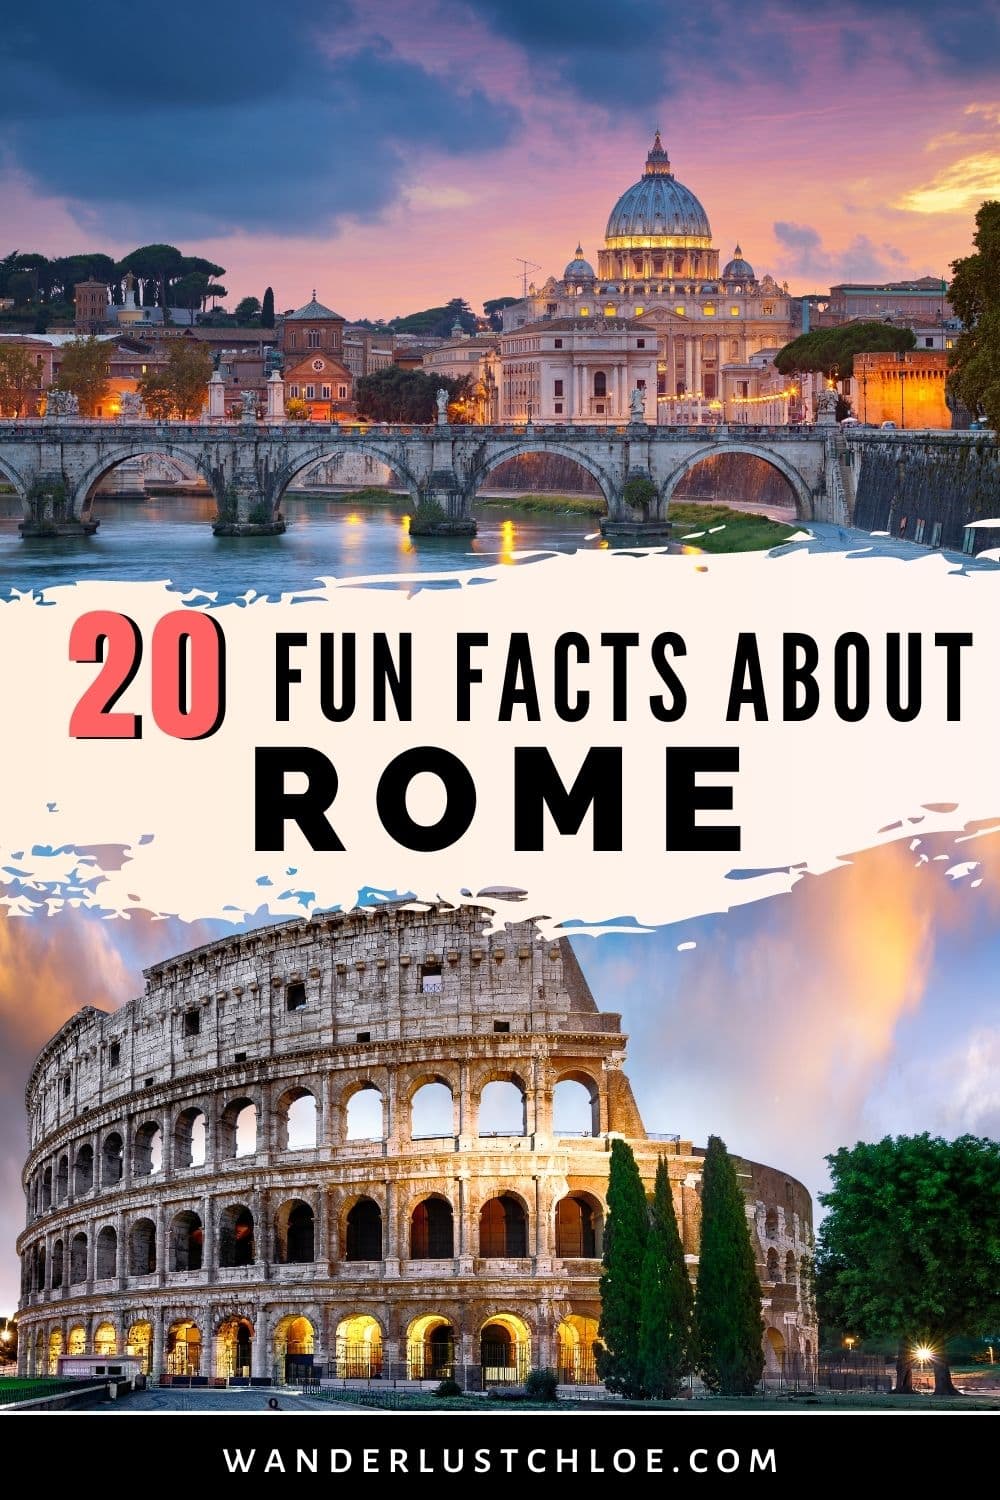 Fun facts about Rome